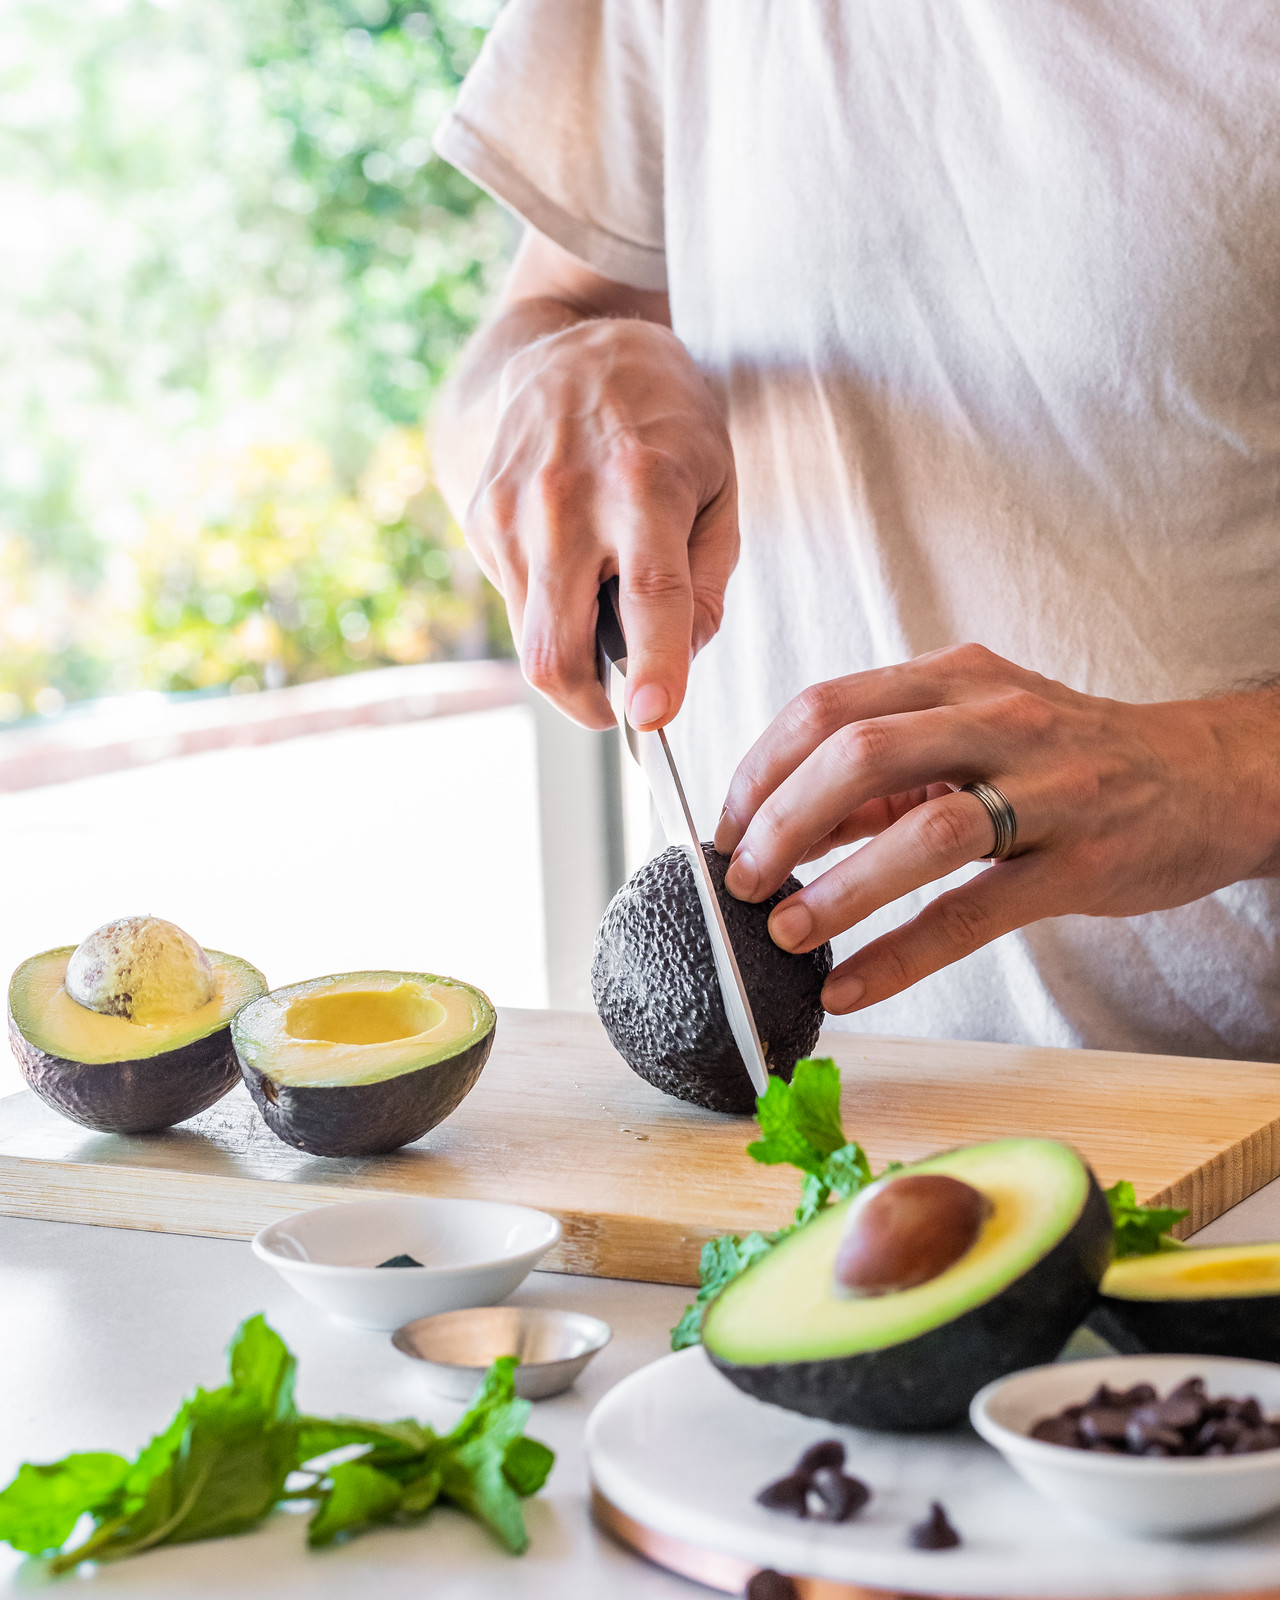 select avocados that are firm, but give slightly when squeezed